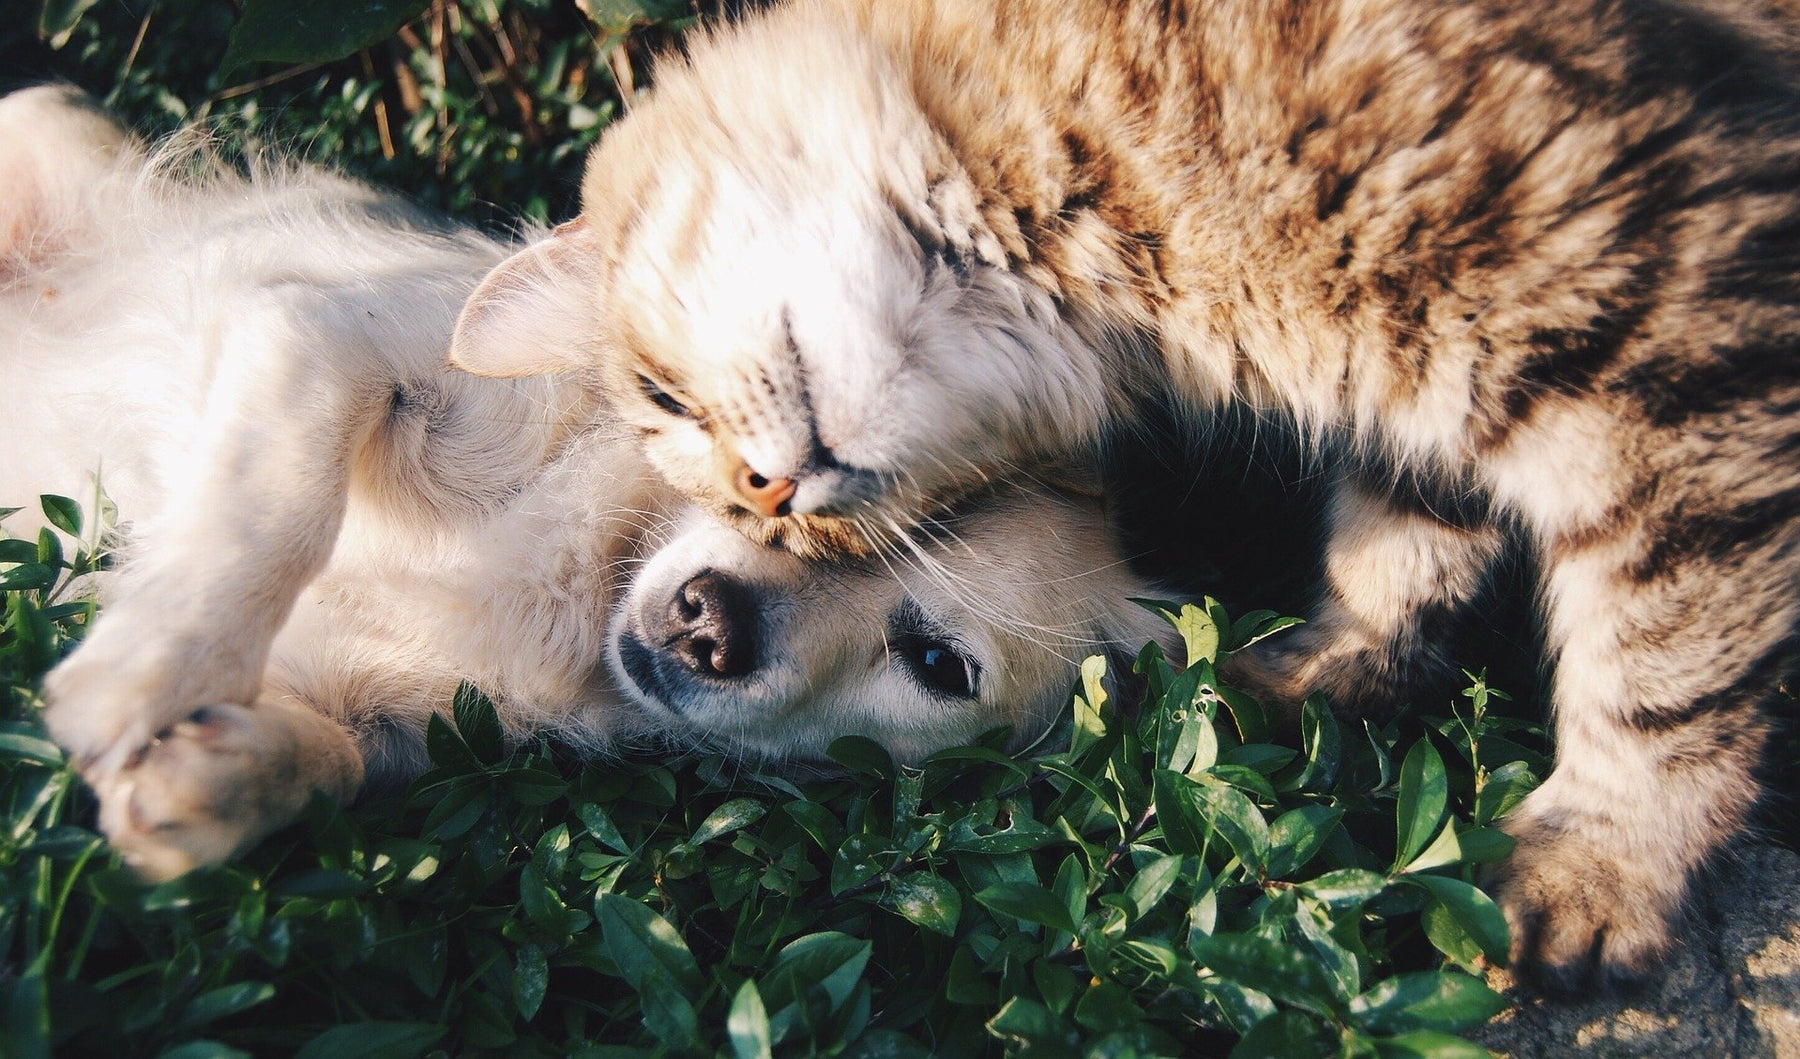 A dog laying on grass and a cat touching his head